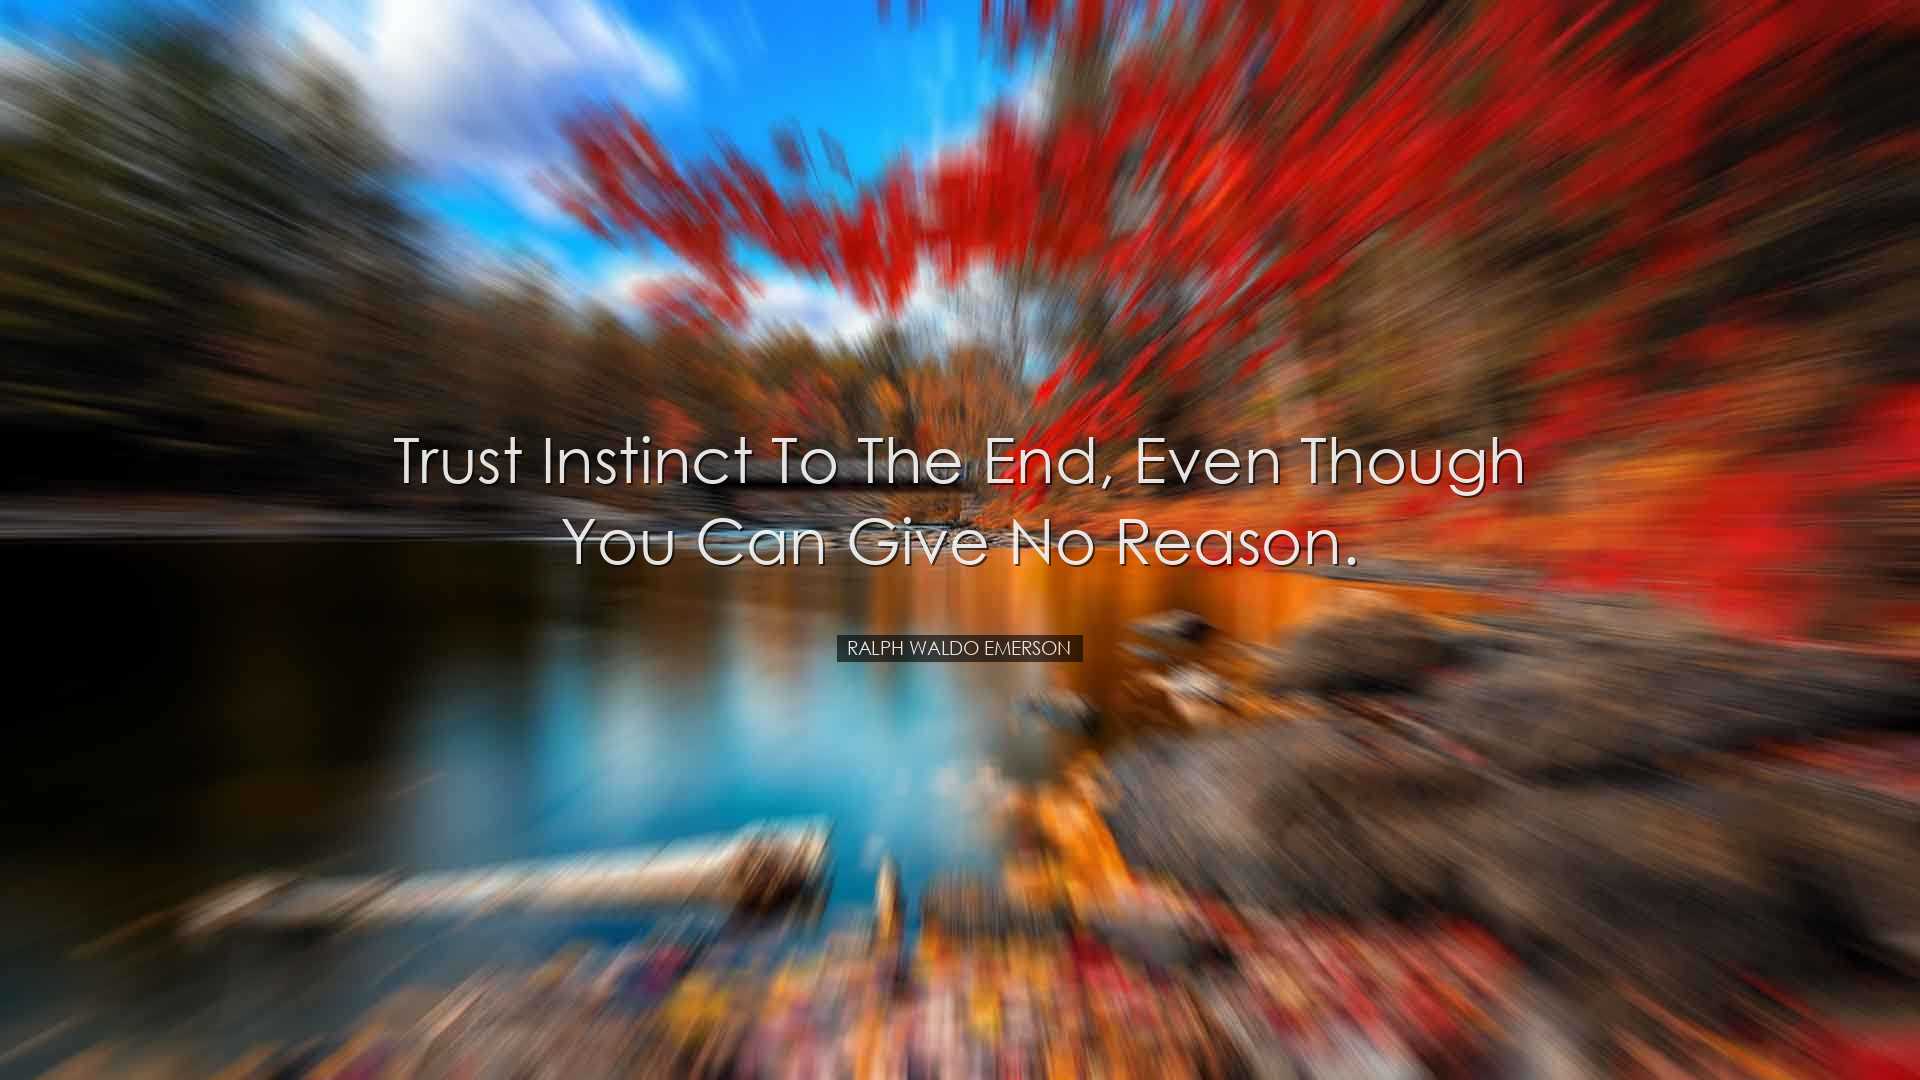 Trust instinct to the end, even though you can give no reason. - R